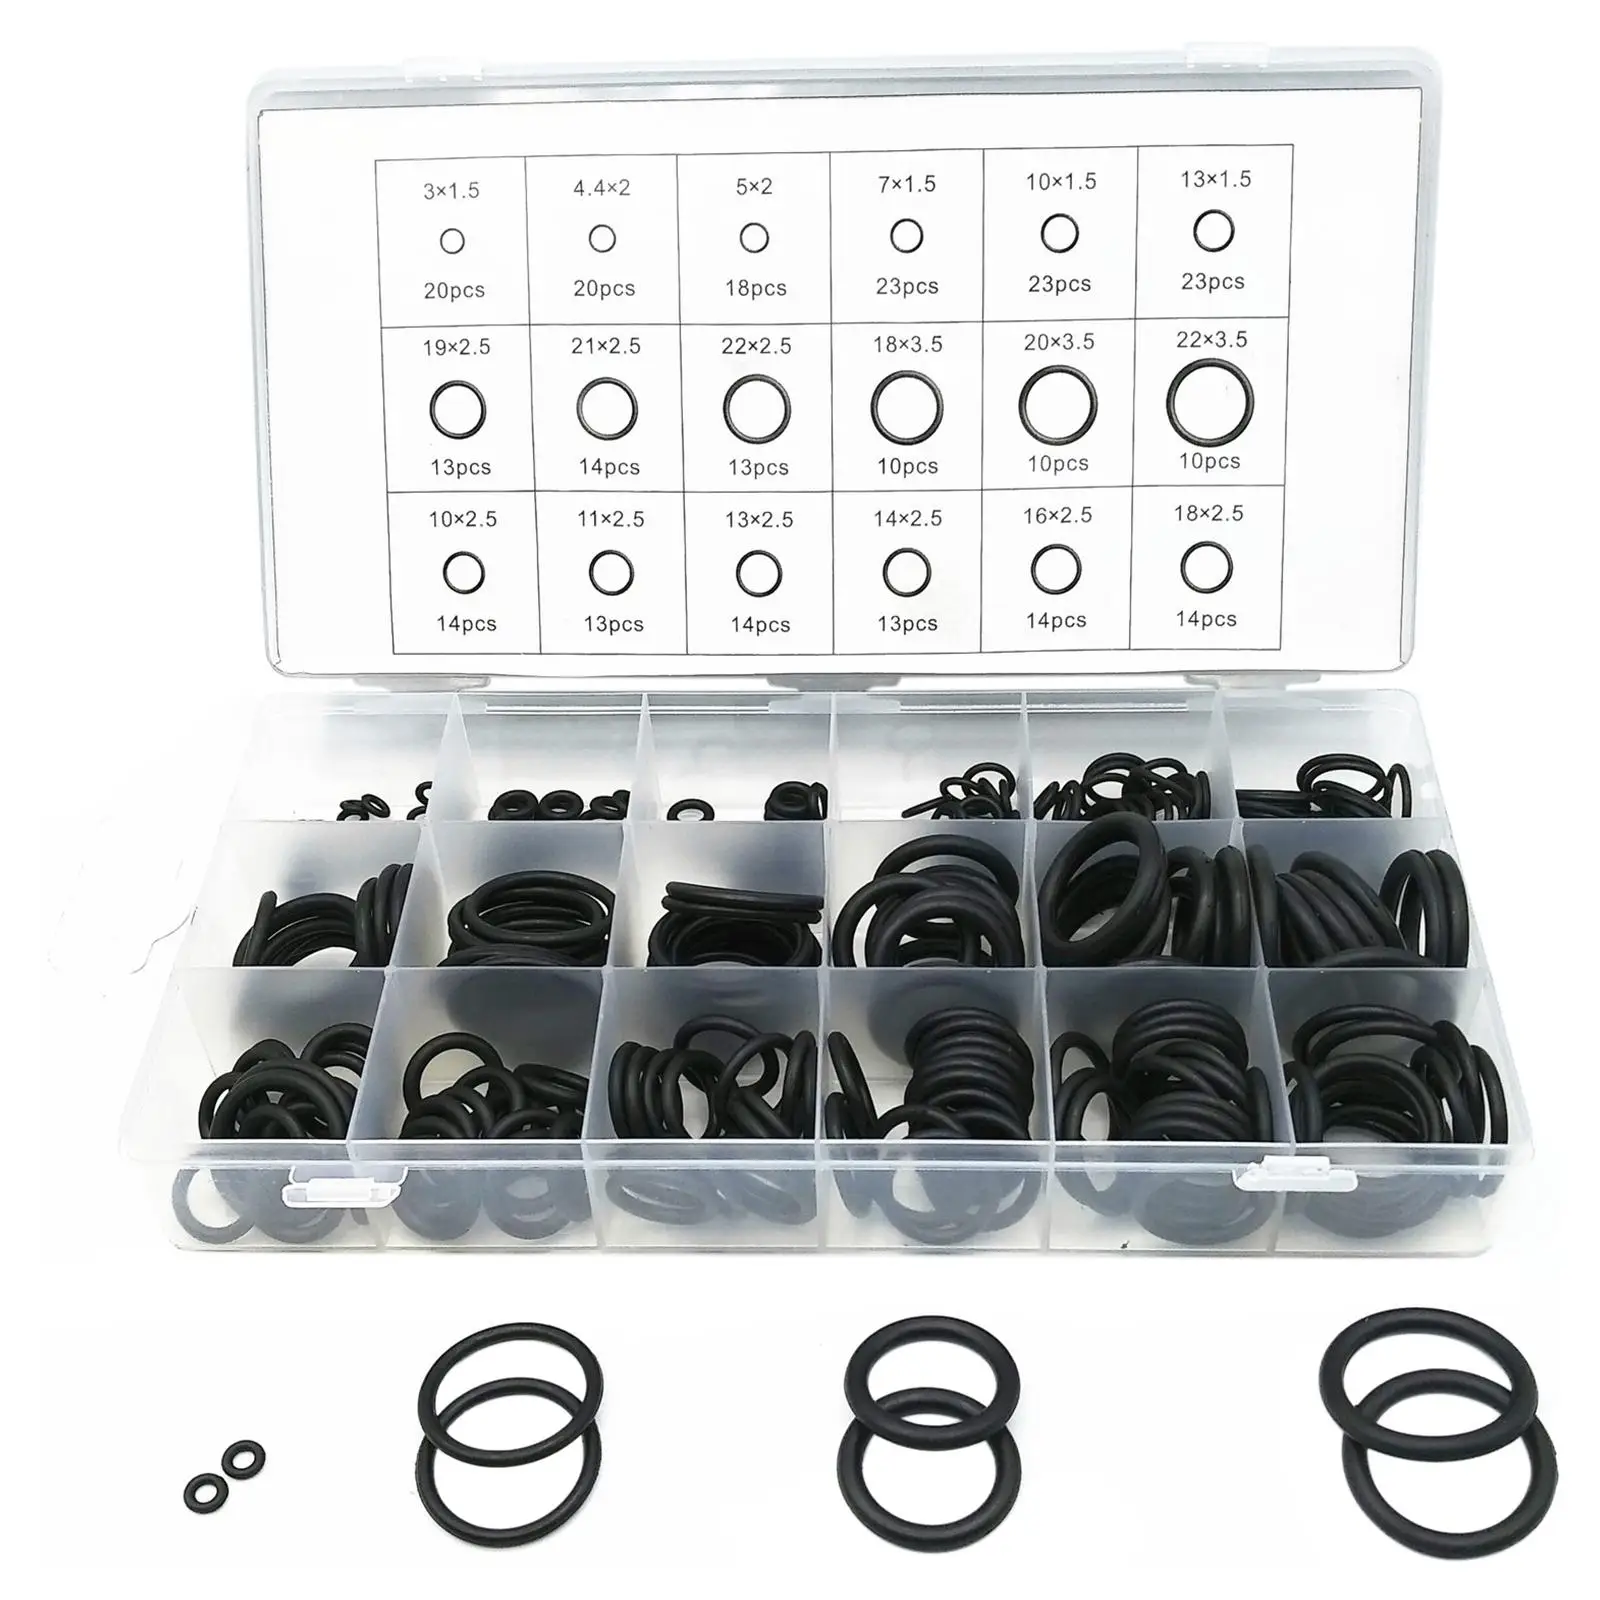 279 Pieces Rubber O Ring Assortment Kit 18 Different Sizes Electrical Wire Gasket Washer Set Round Fit for Automobiles Plumbing